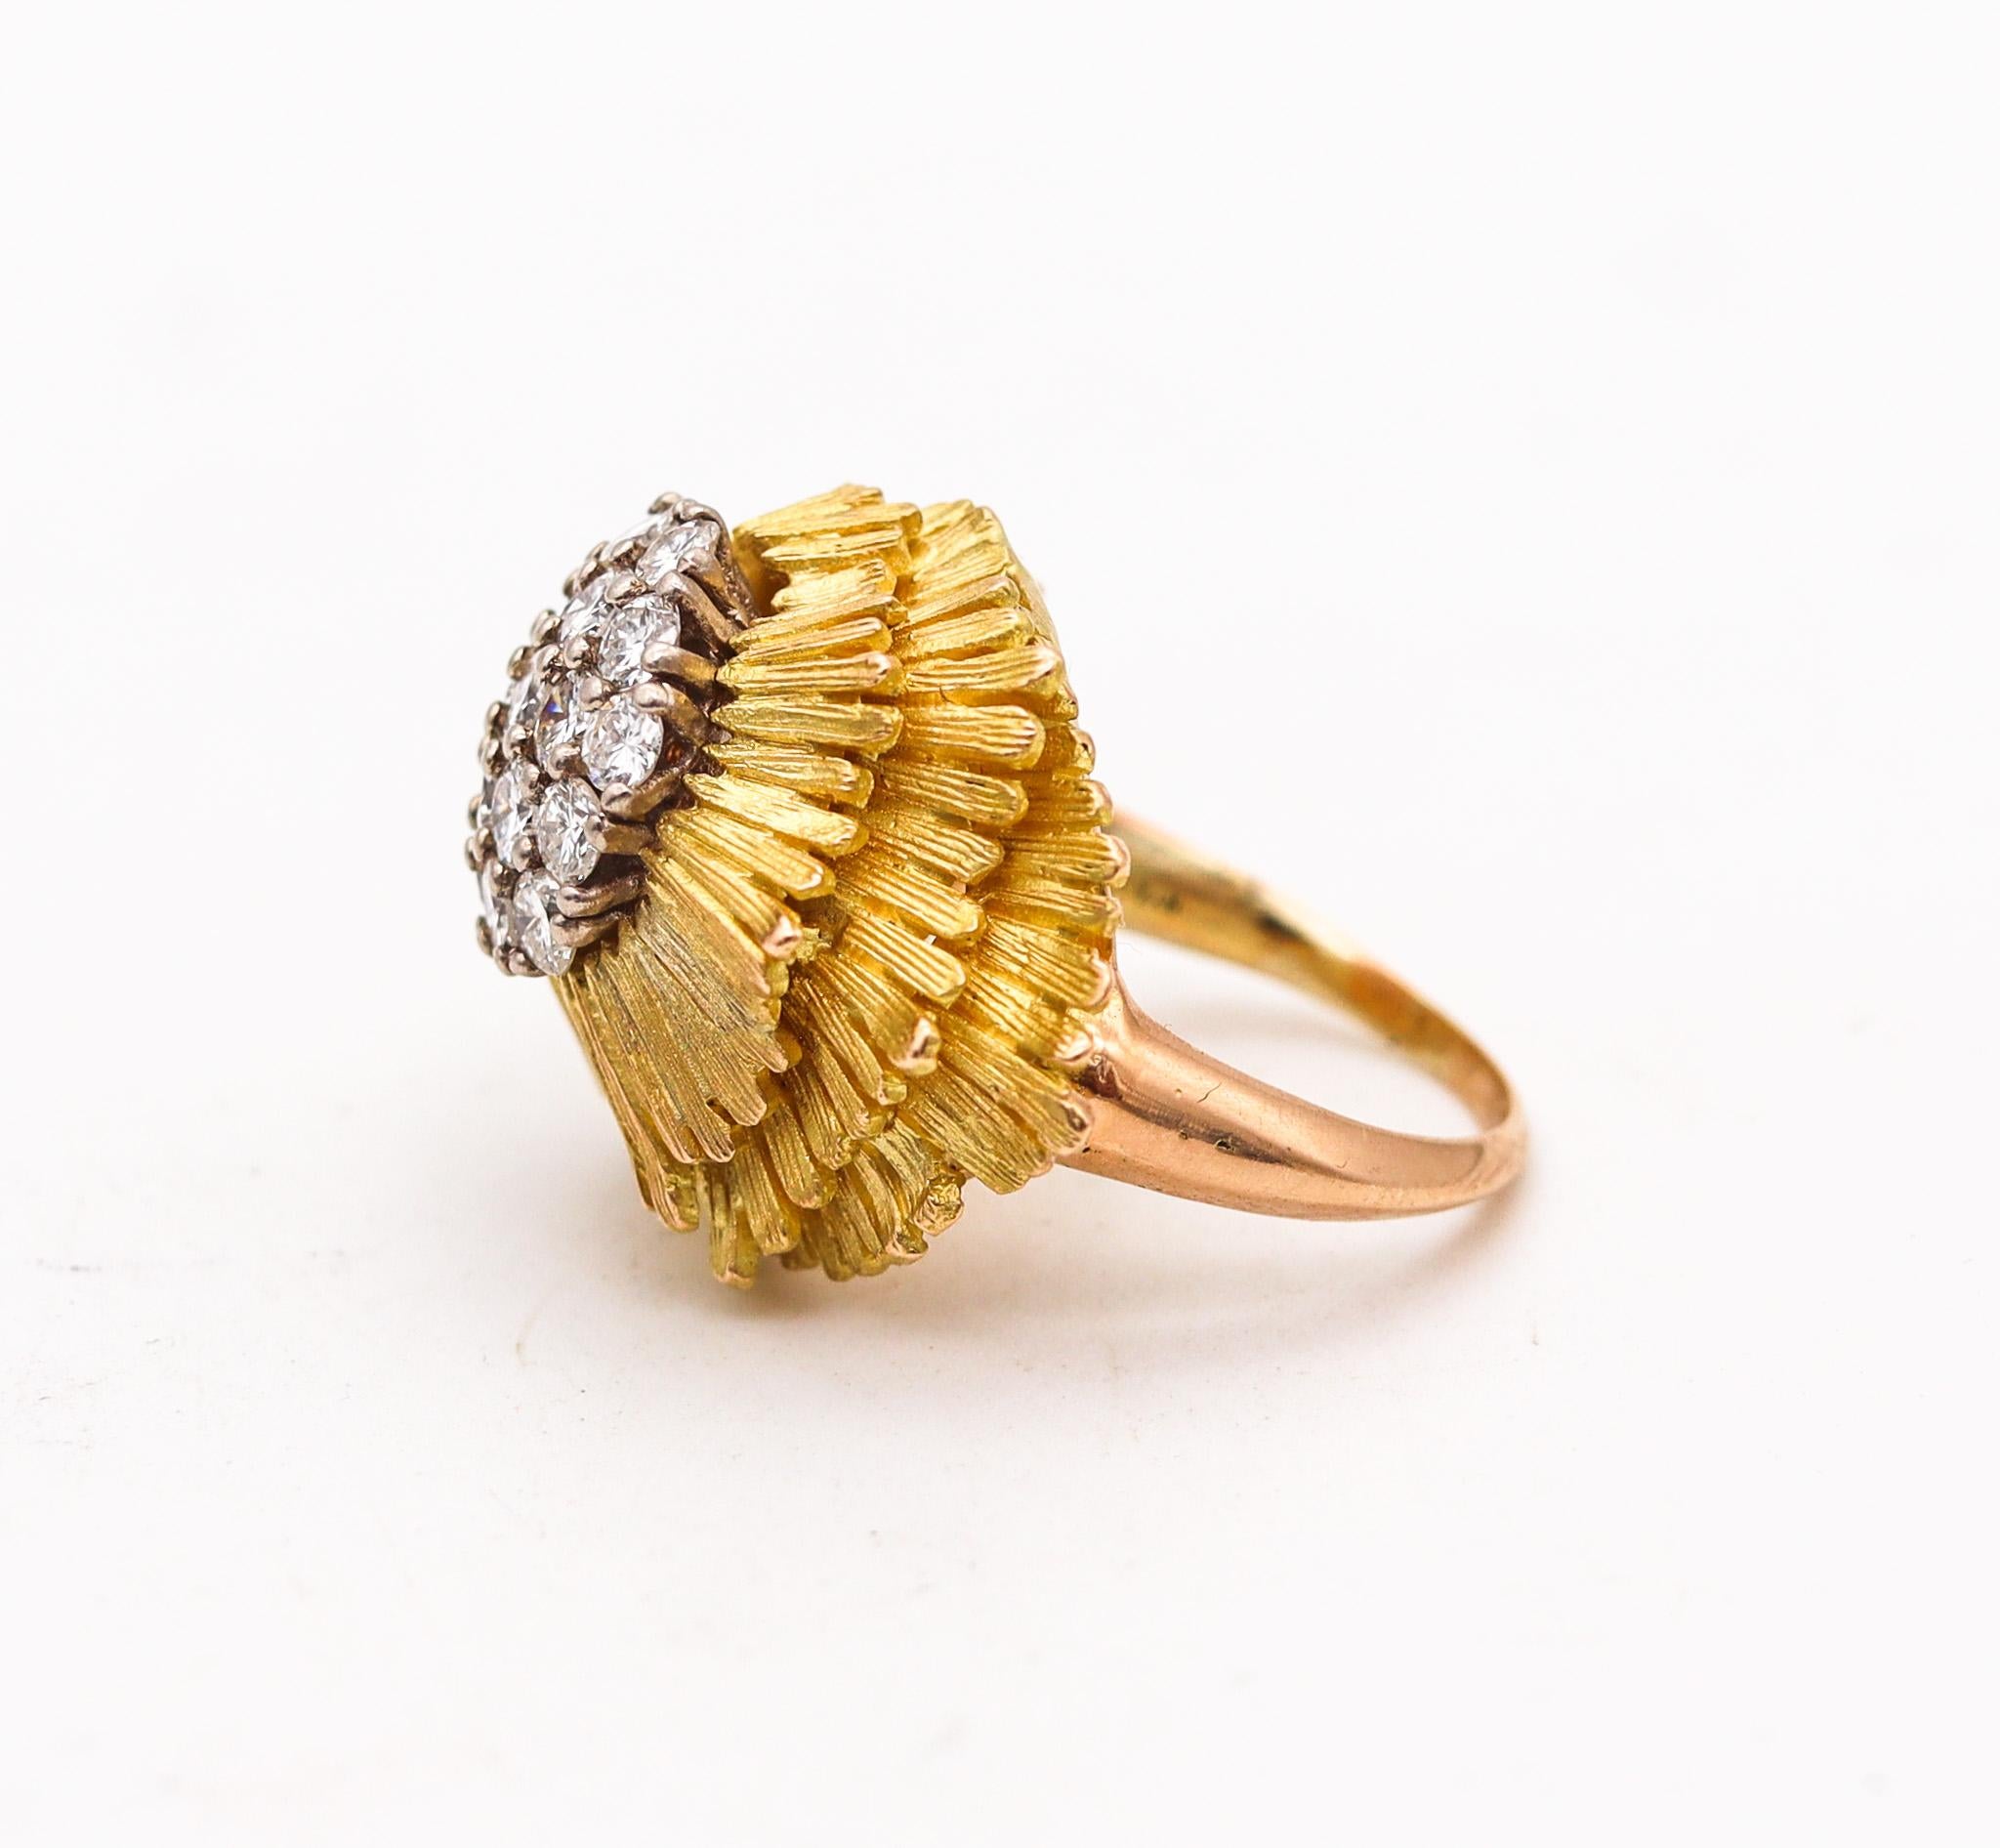 Modernist Tiffany & Co. 1960 Cluster Cocktail Ring In 18Kt Gold With 1.74 Ctw In Diamonds For Sale